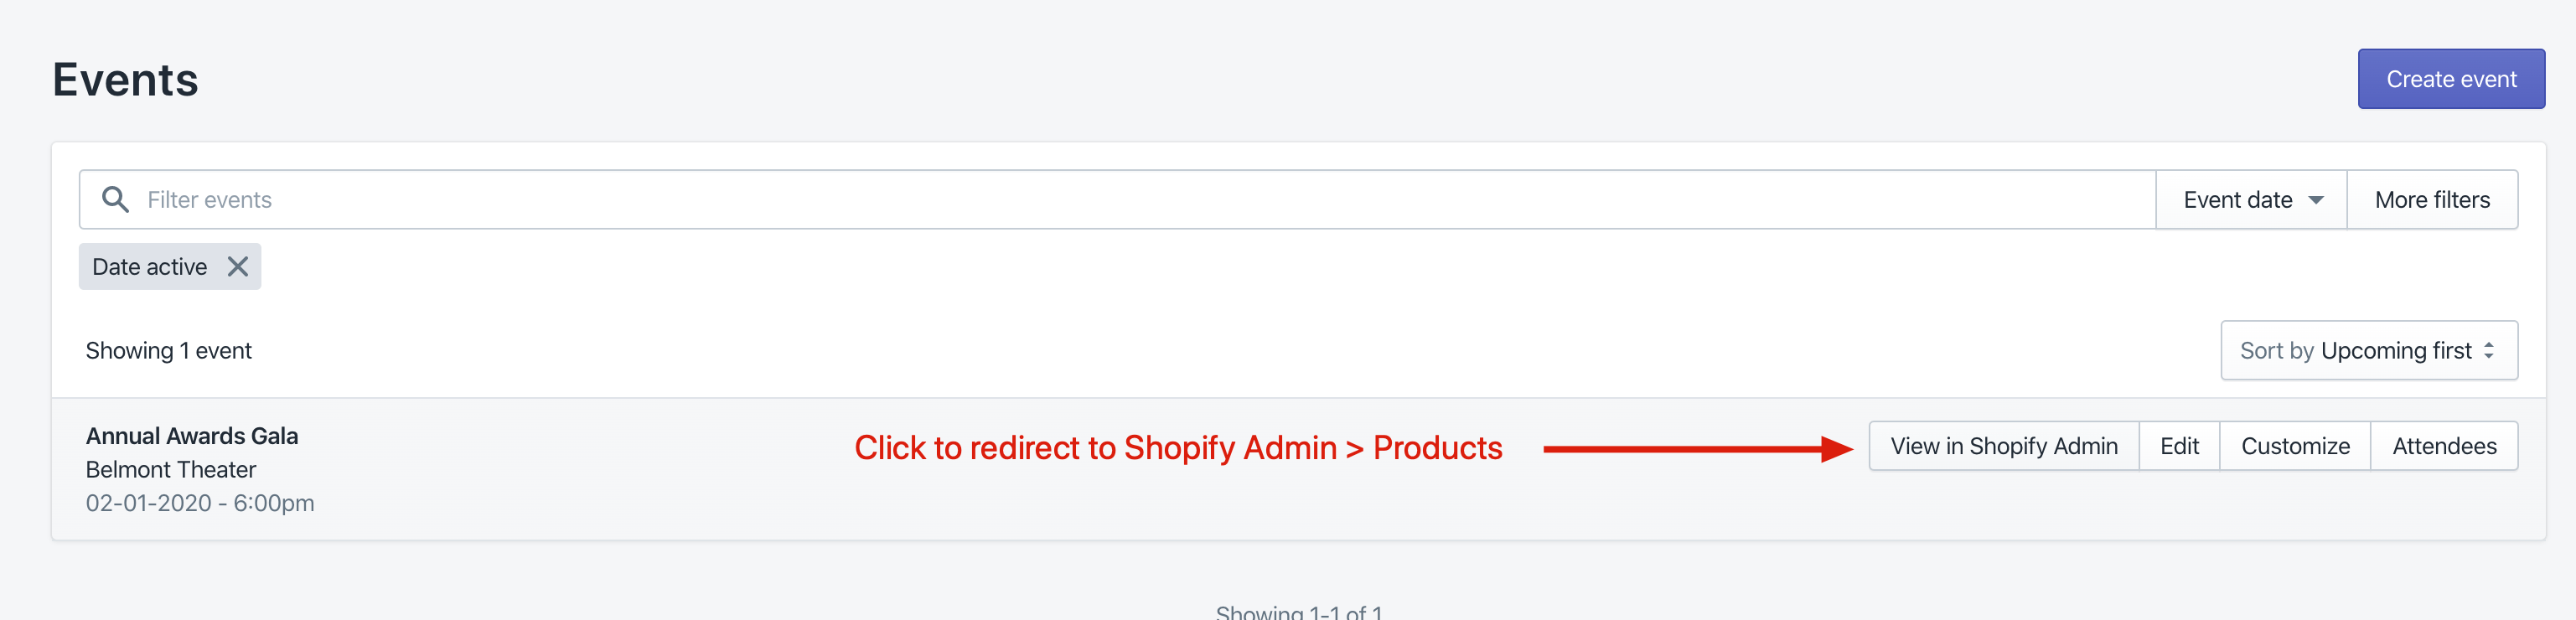 Shopify event ticket product